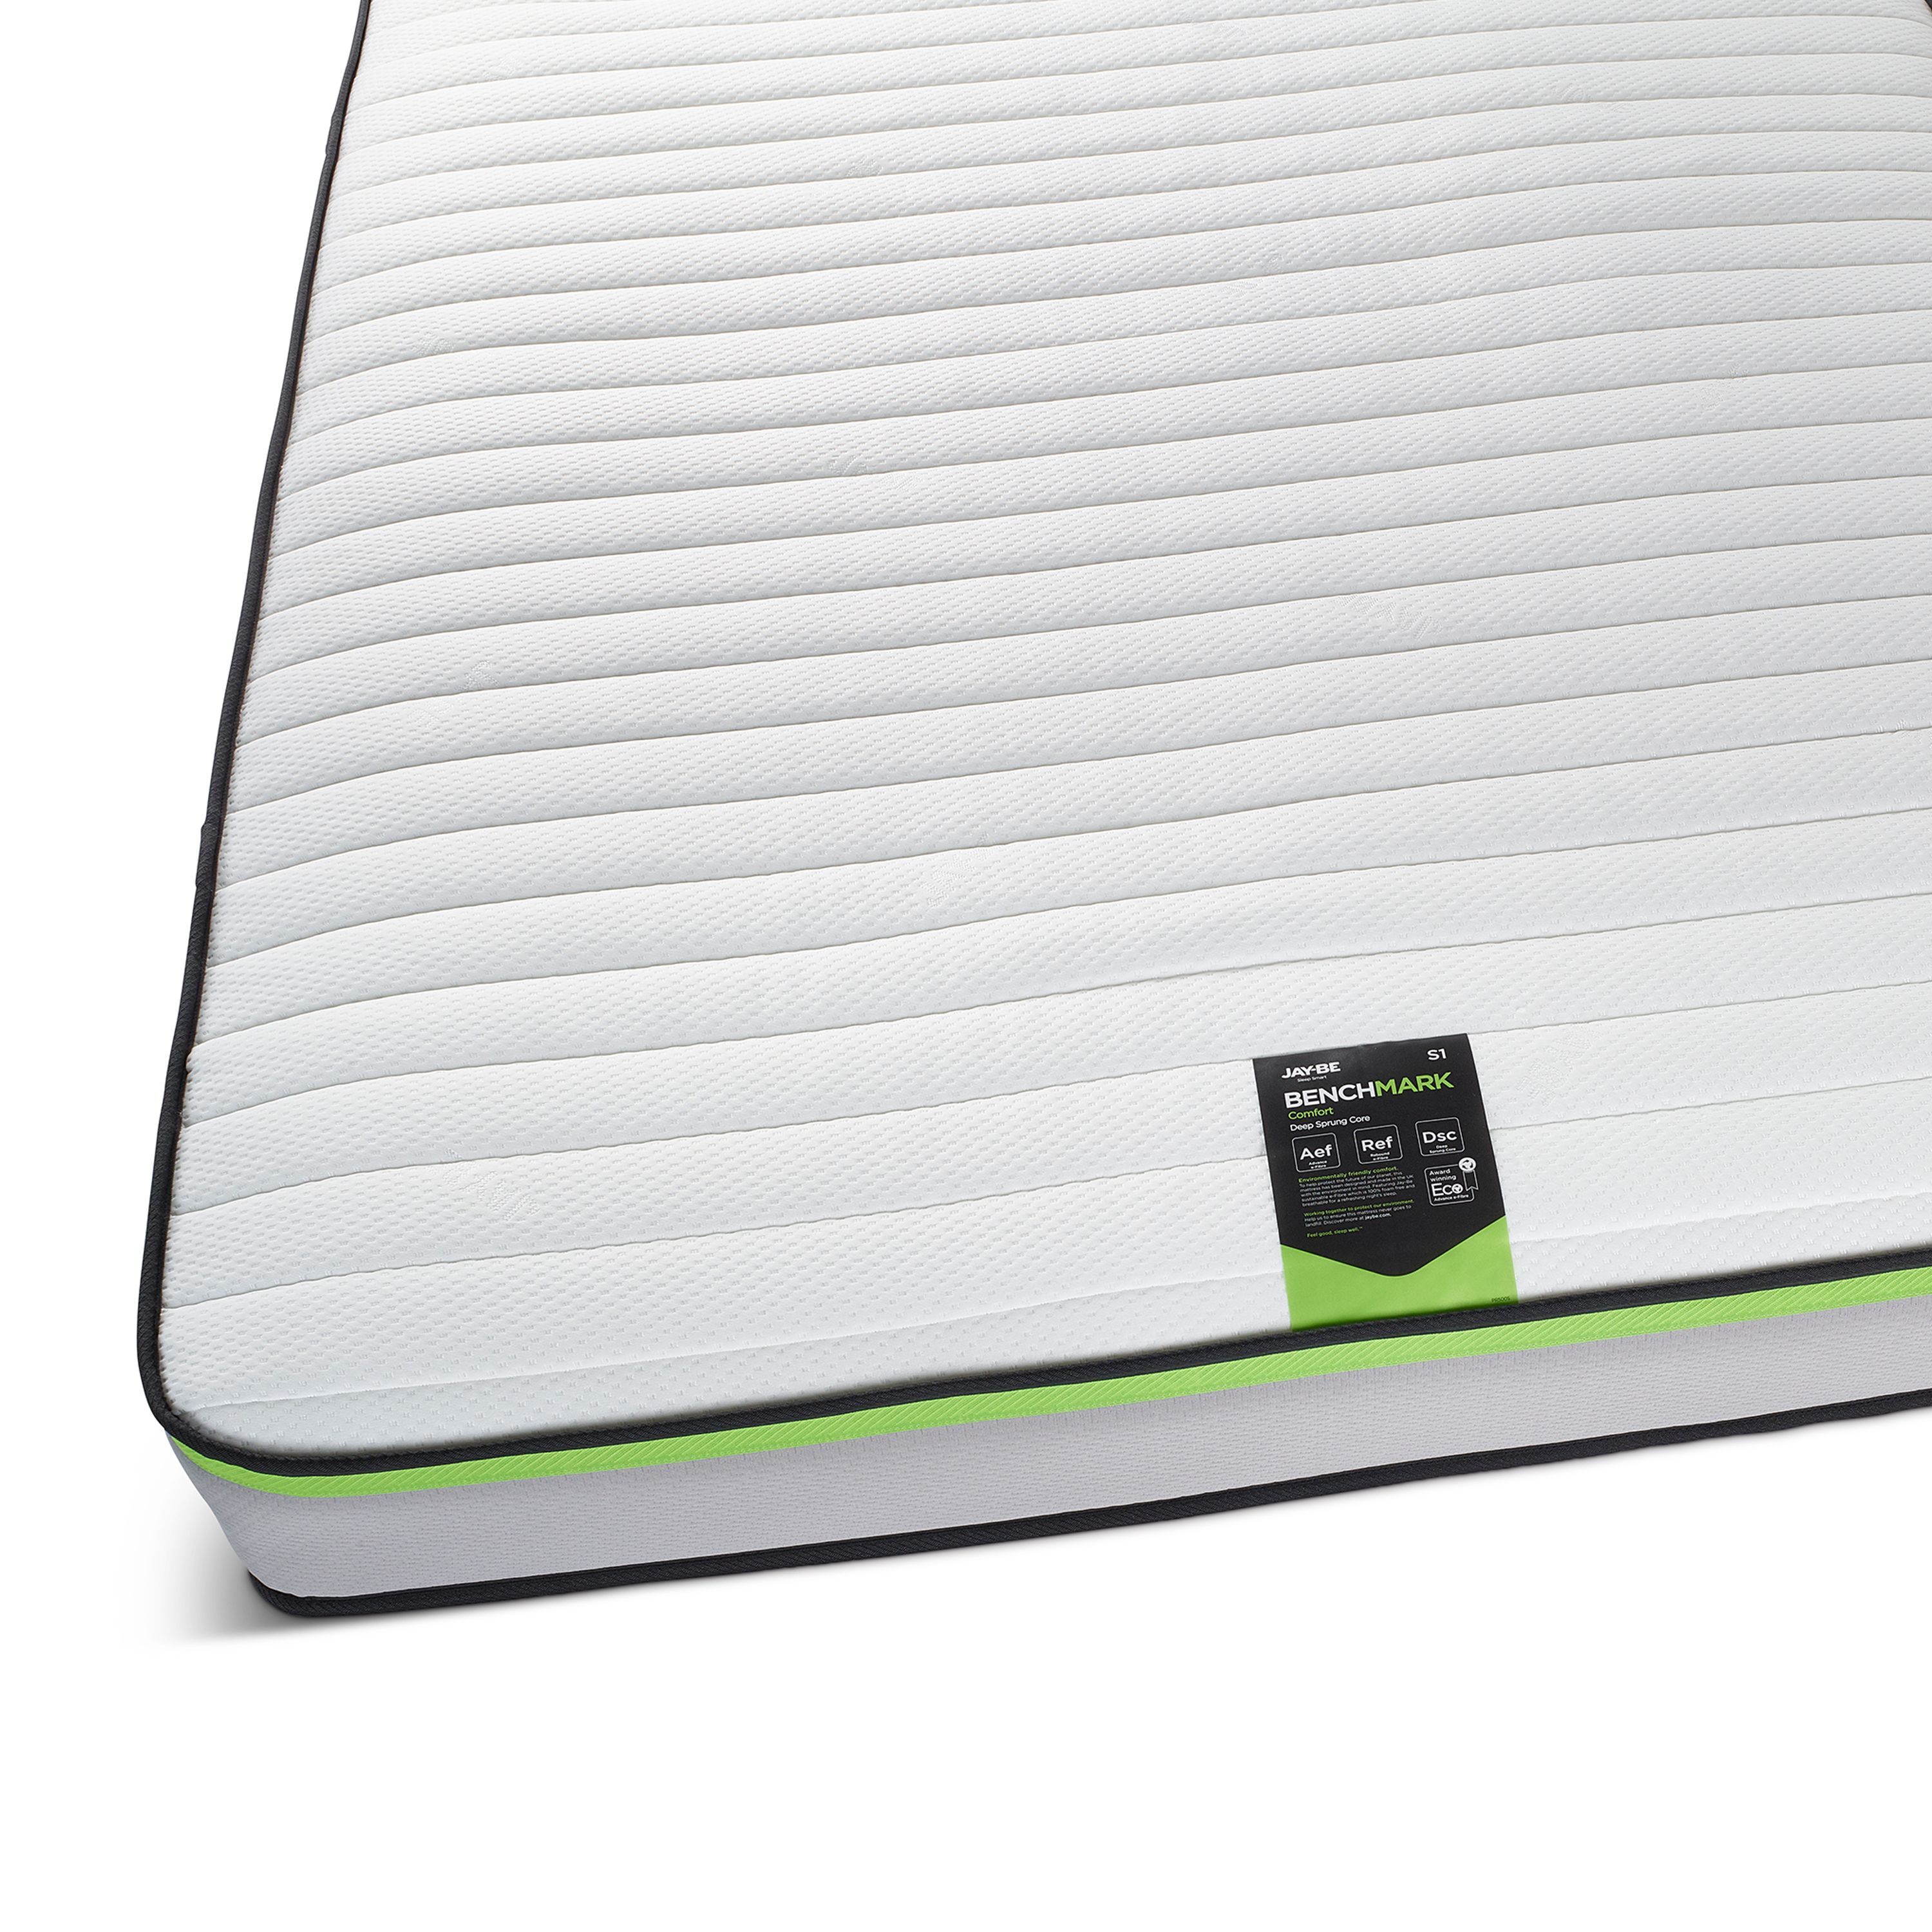 Jay-Be Benchmark S1 Comfort Eco Friendly Open coil Water resistant King Mattress